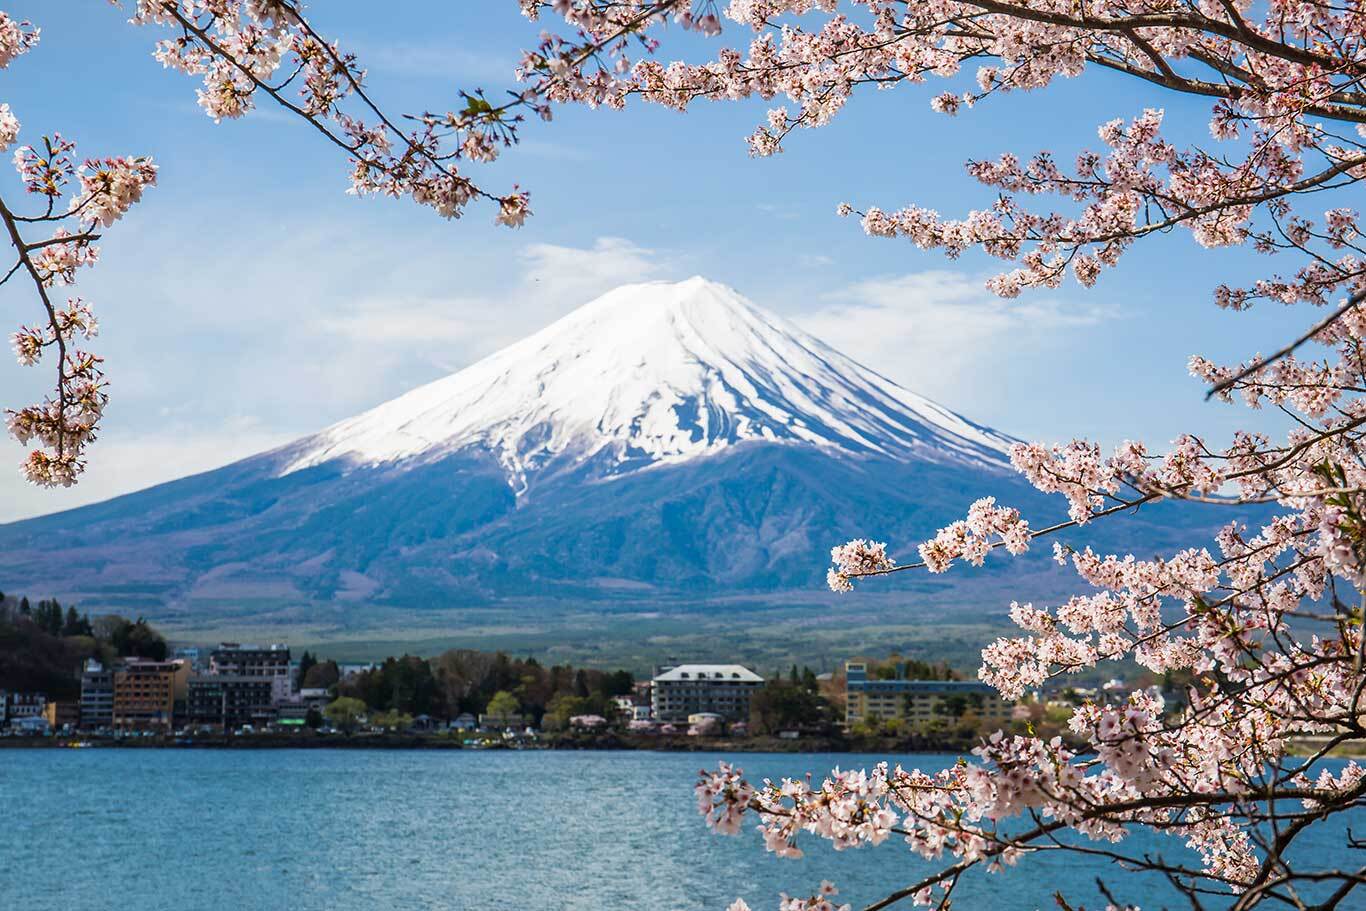 There are few sights as beautiful as Japan during cherry blossom season